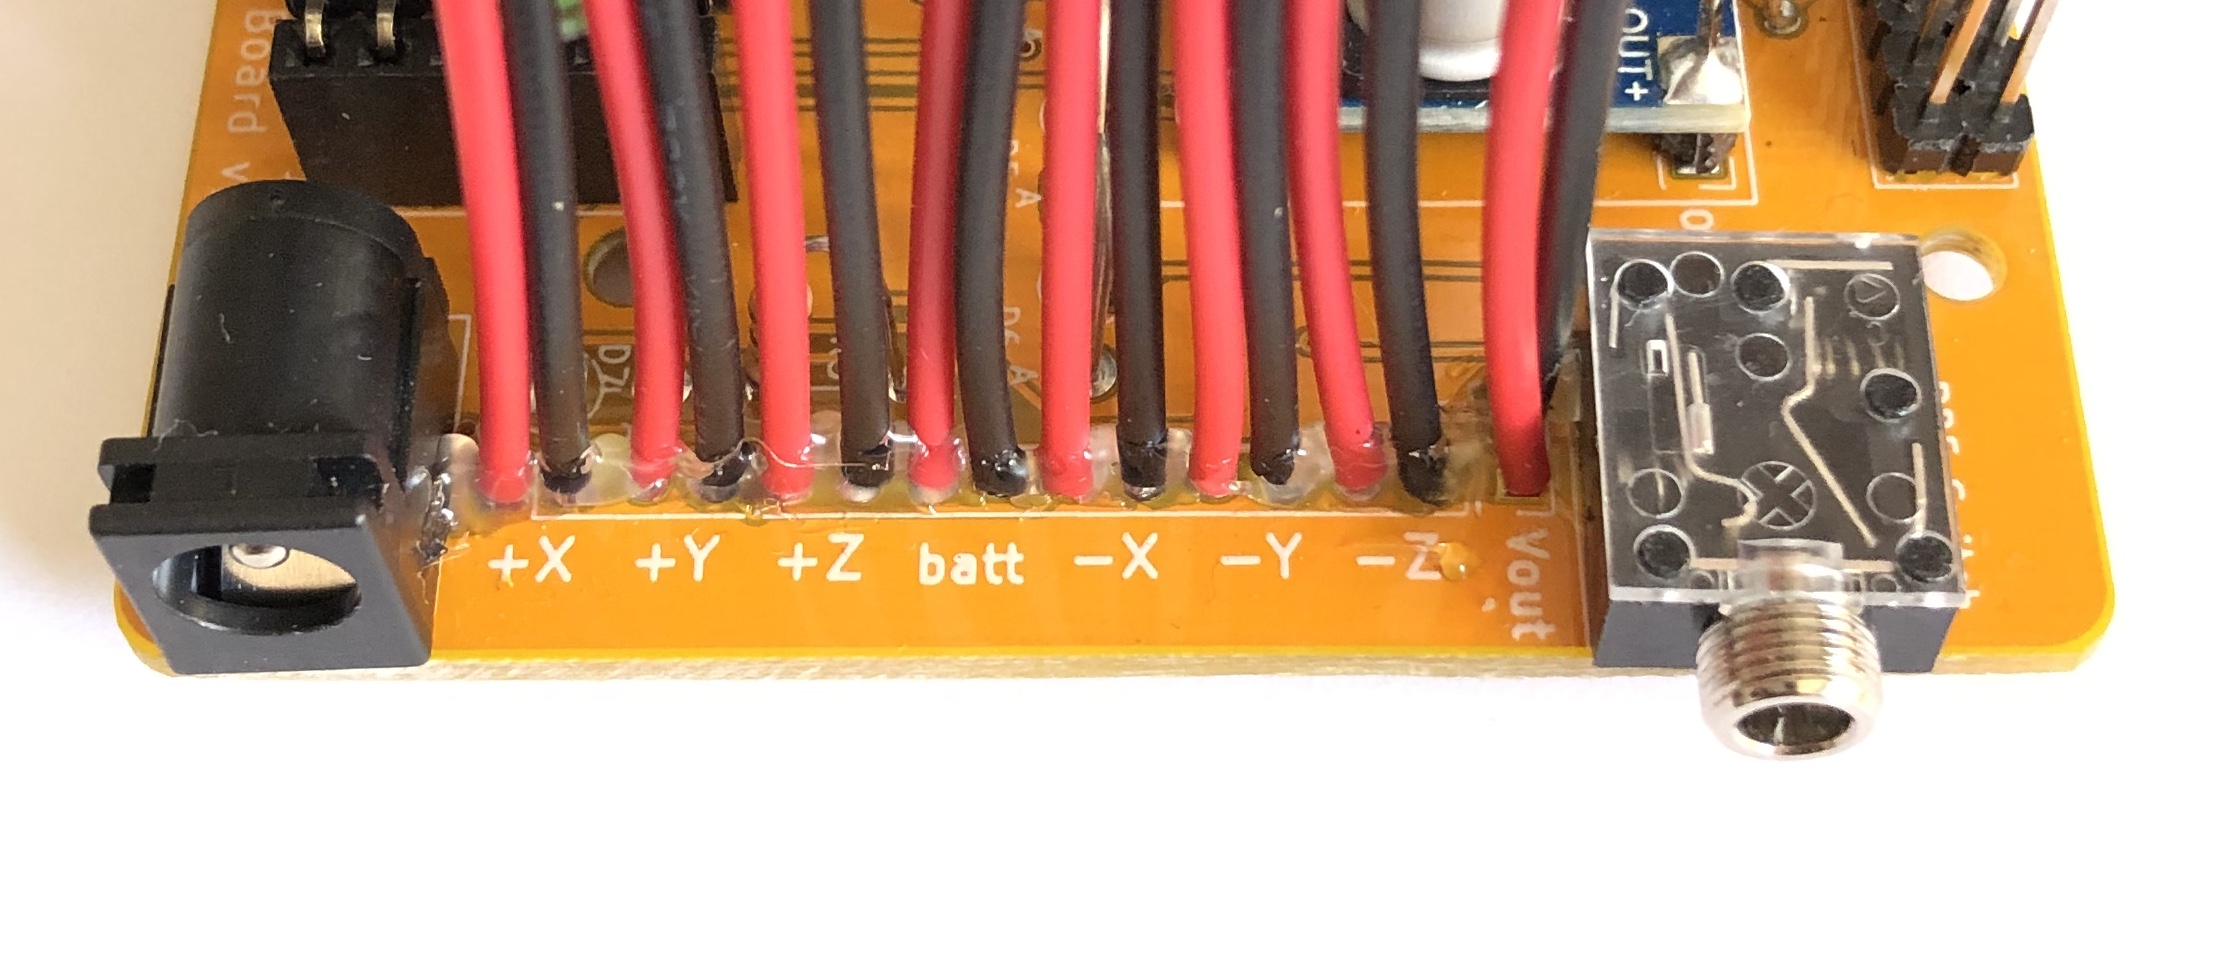 PCB JST RCY Wiring